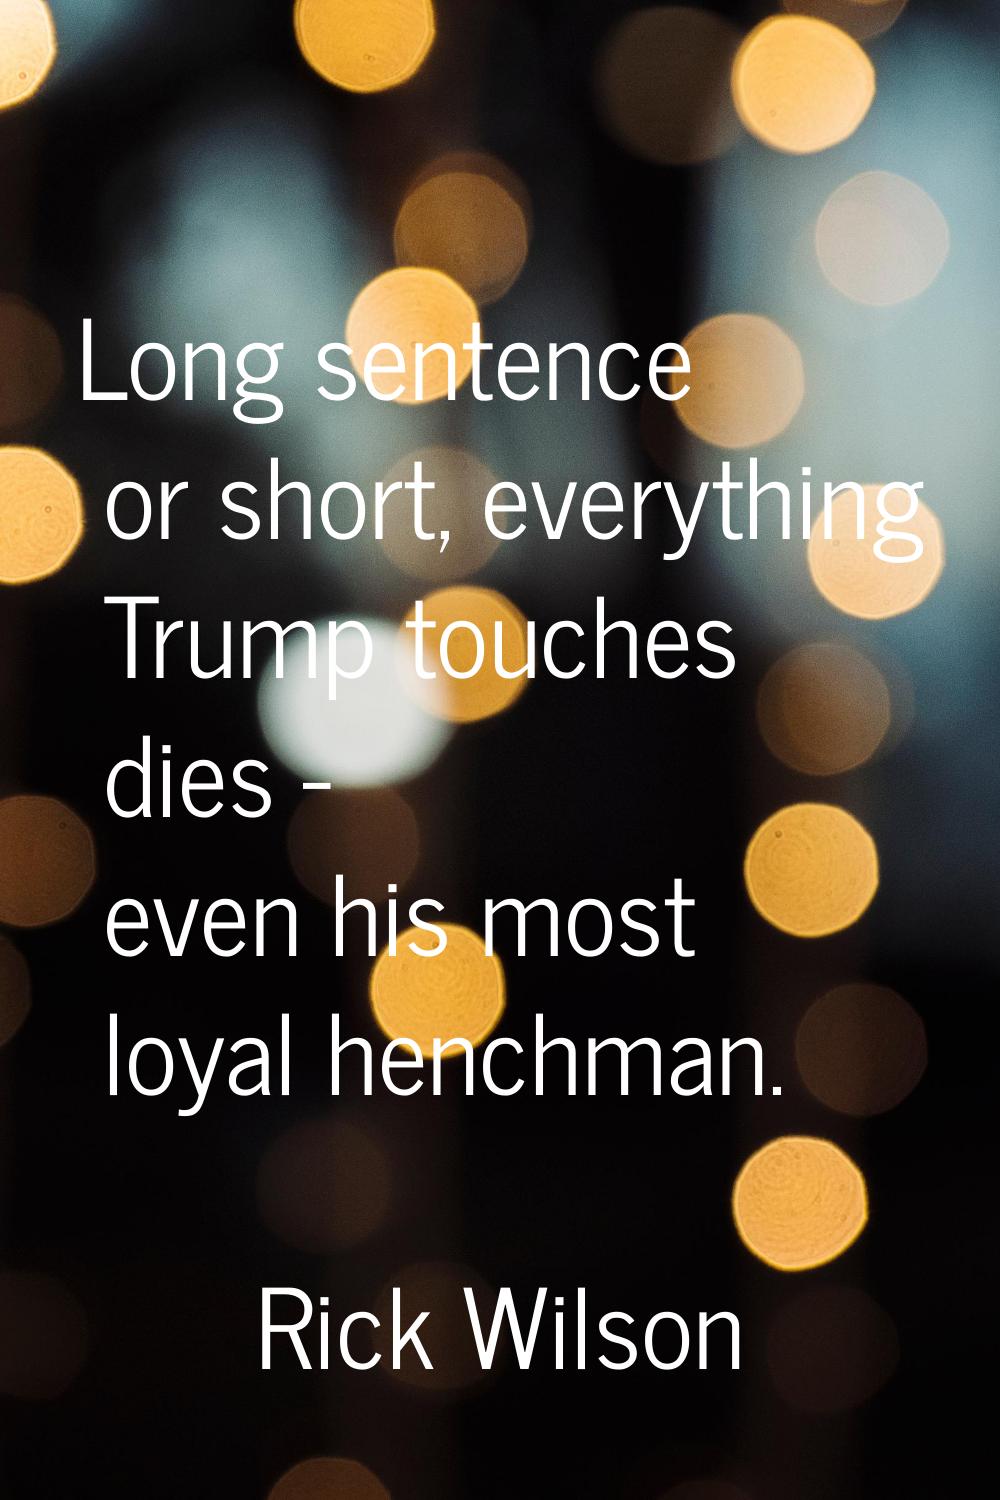 Long sentence or short, everything Trump touches dies - even his most loyal henchman.